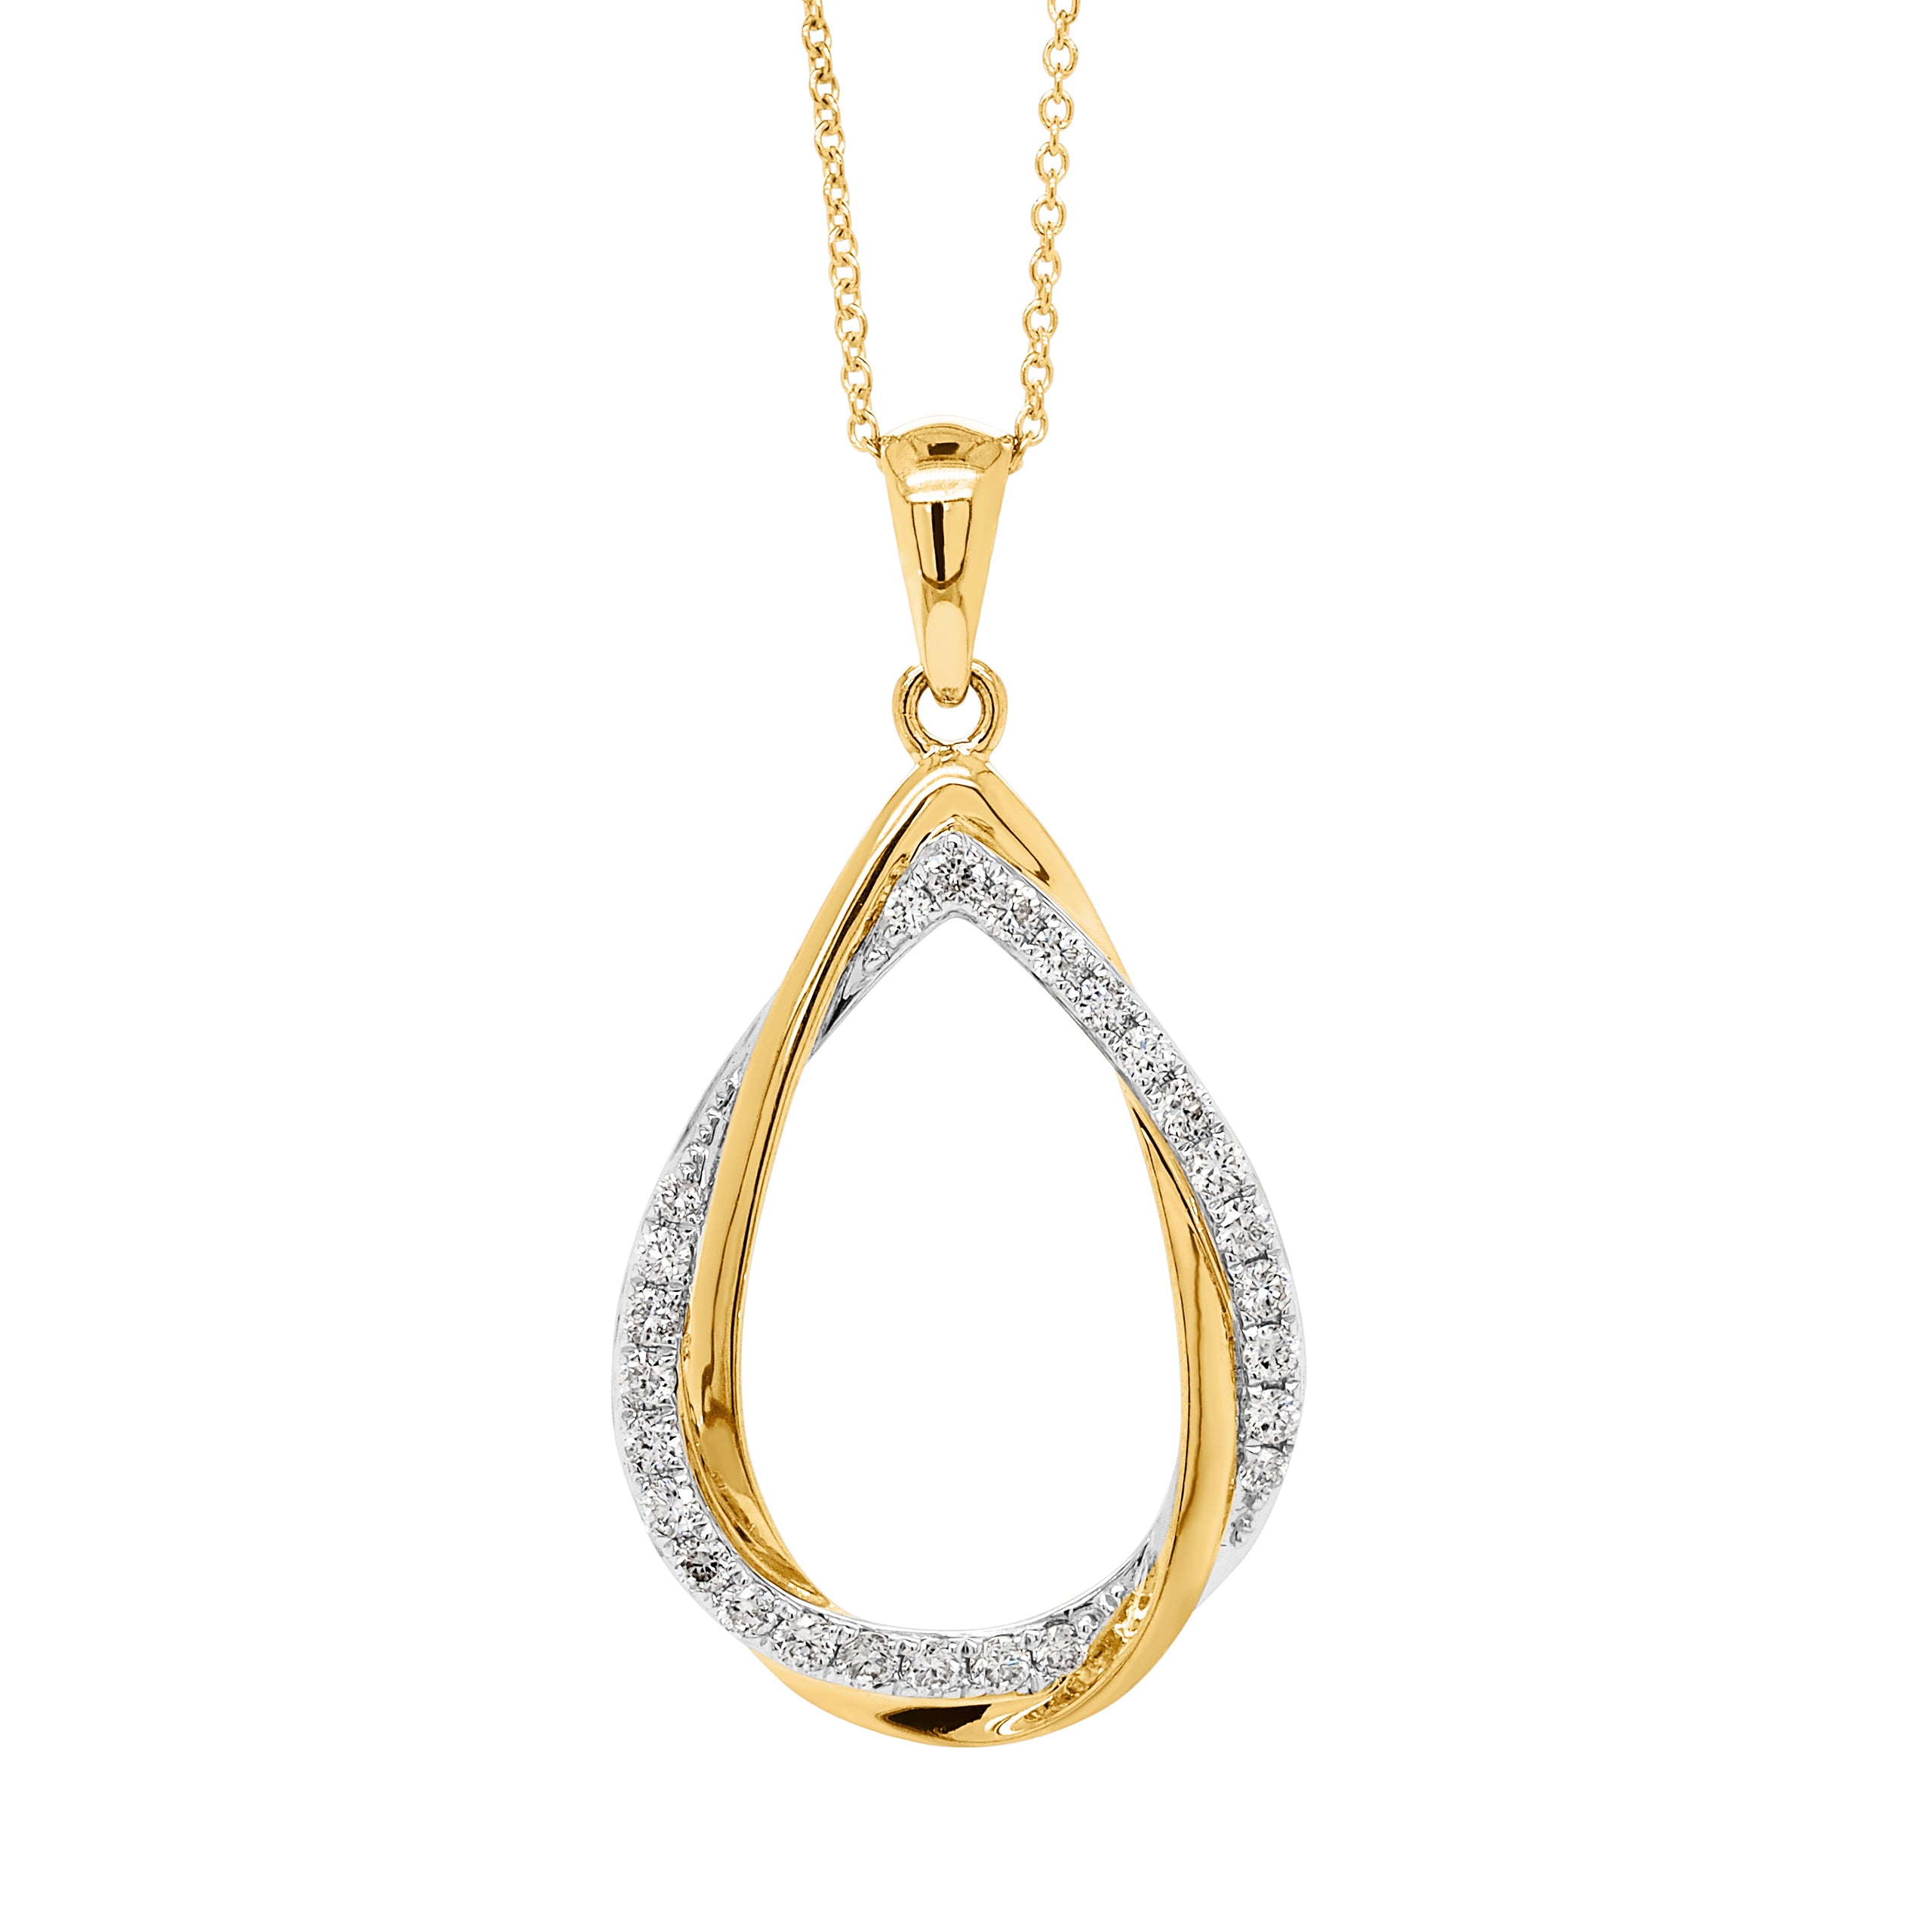 9ct Yellow Gold Diamond Open Offset Pear Shaped Pendant on 45cm Chain